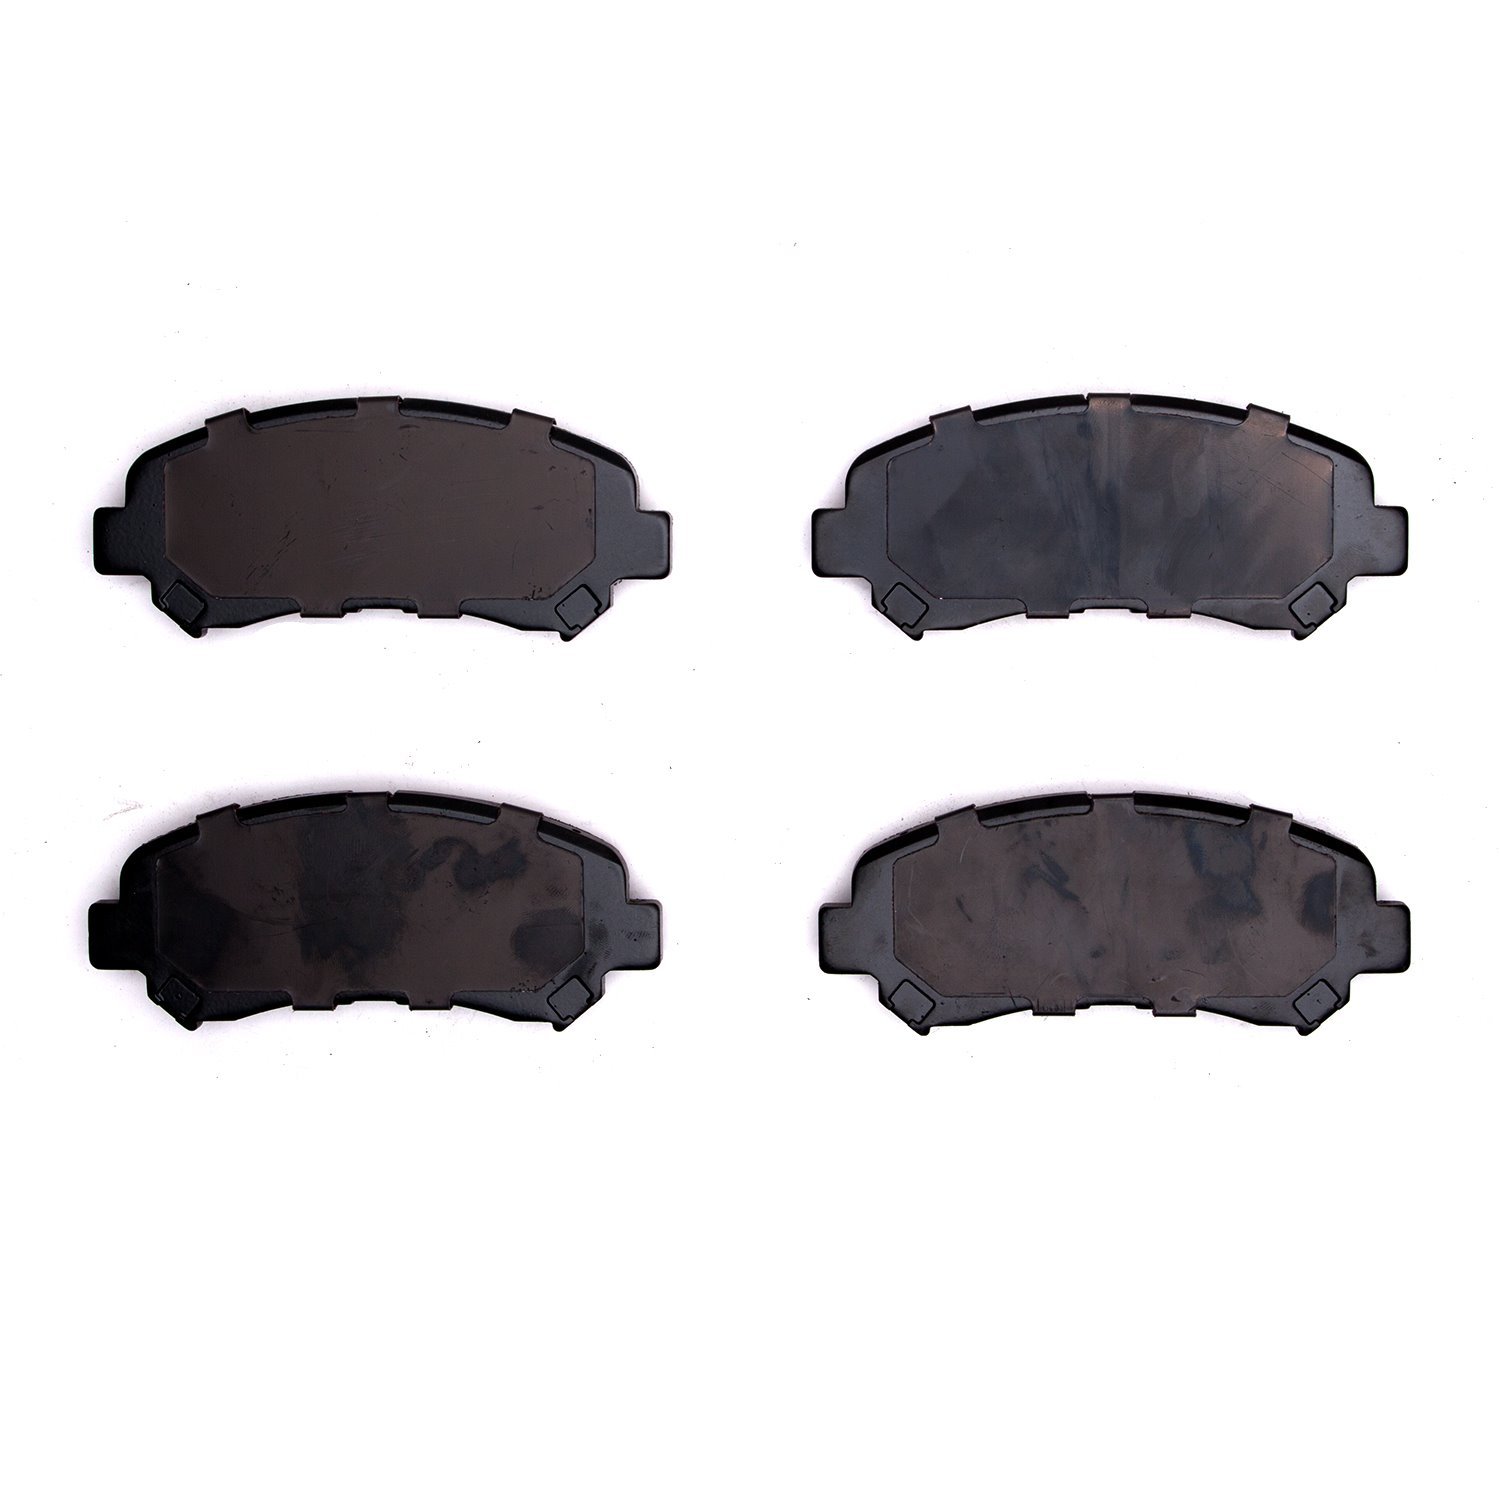 1000-1374-00 Track/Street Low-Metallic Brake Pads Kit, Fits Select Multiple Makes/Models, Position: Front